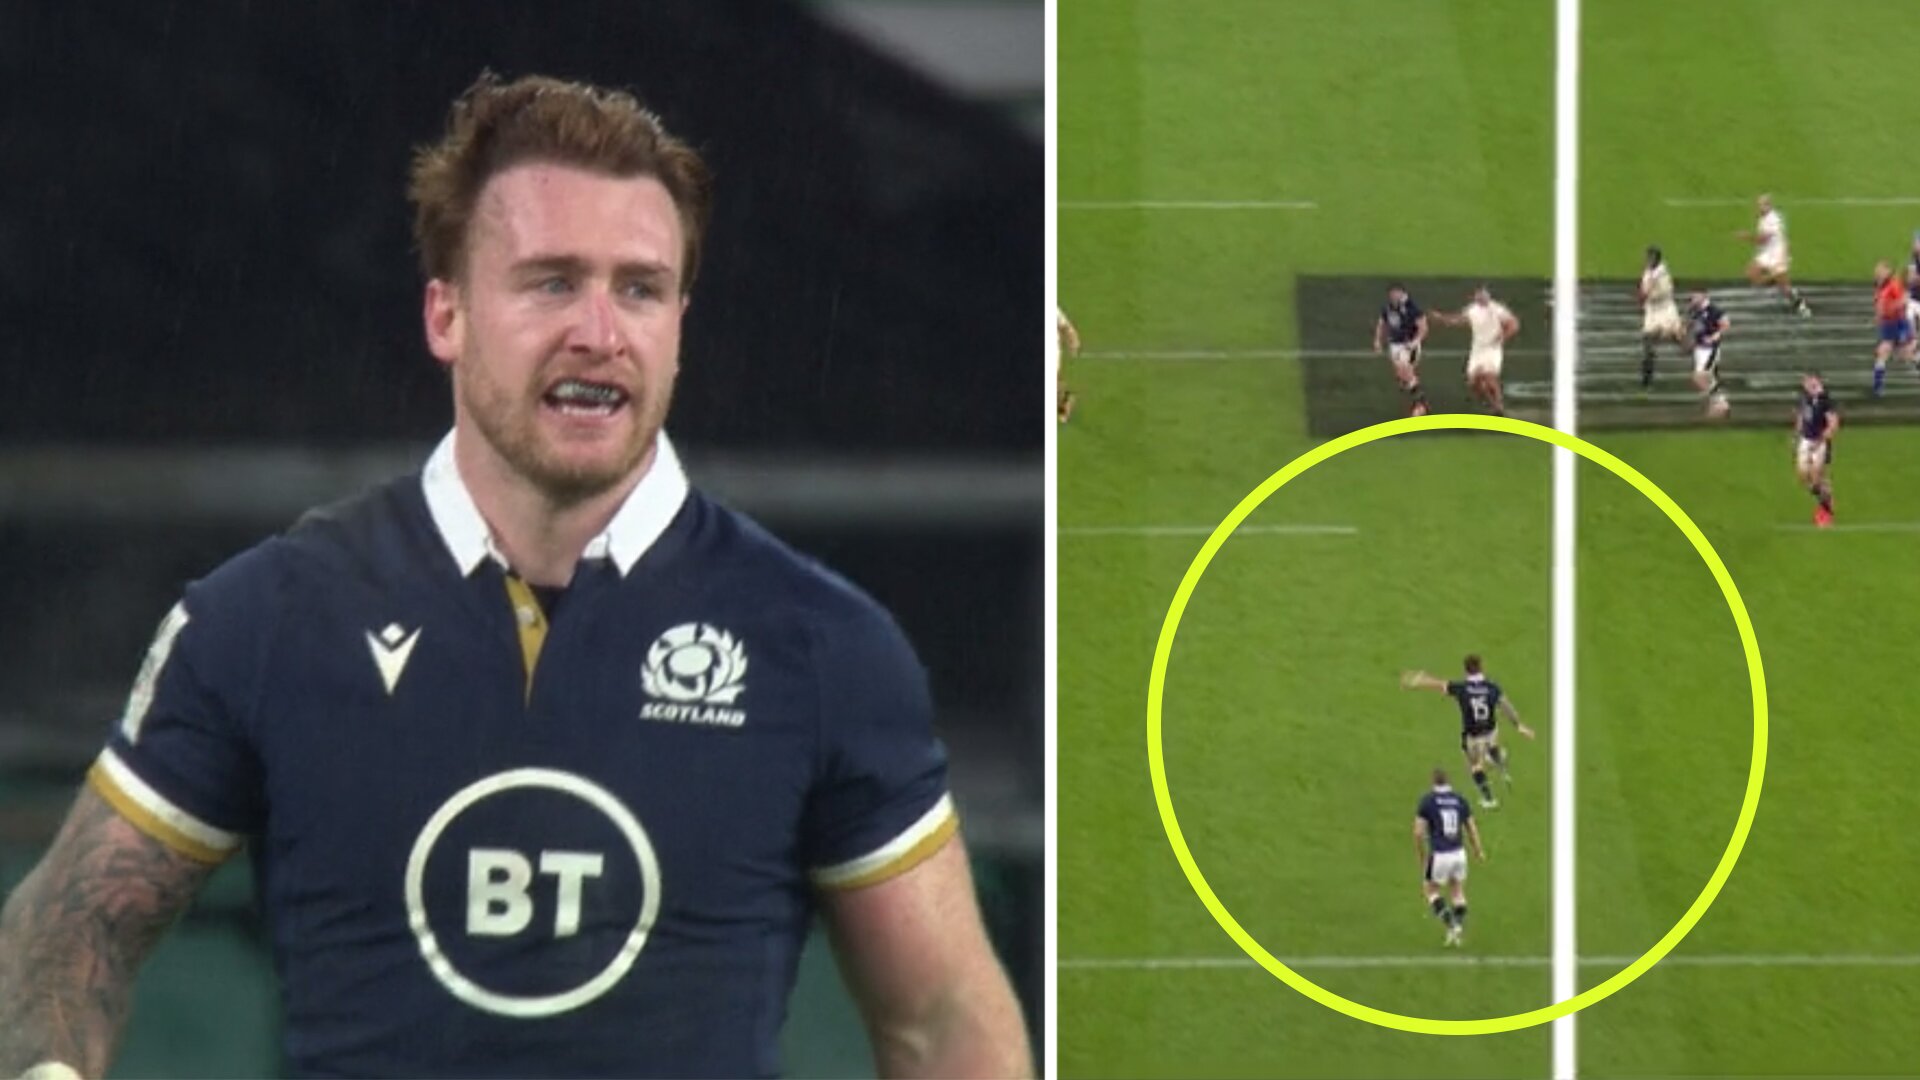 Stuart Hogg kicking compilation shows us exactly why Scotland beat England in Six Nations